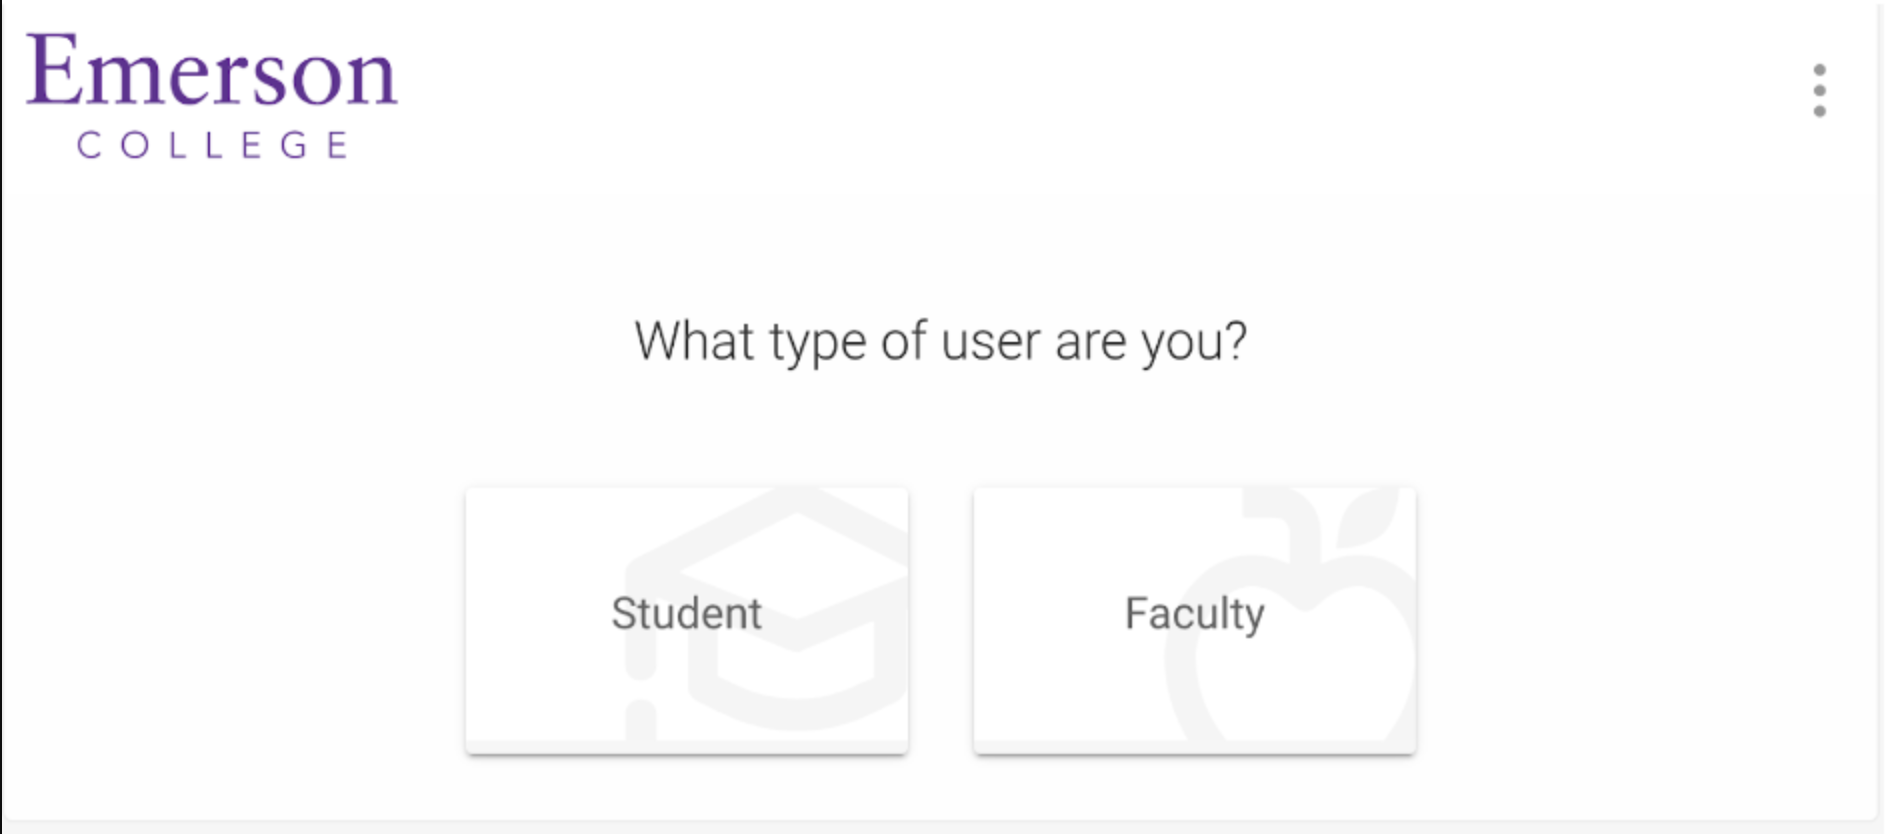 Dialogue prompting indication if user is Student or Faculty